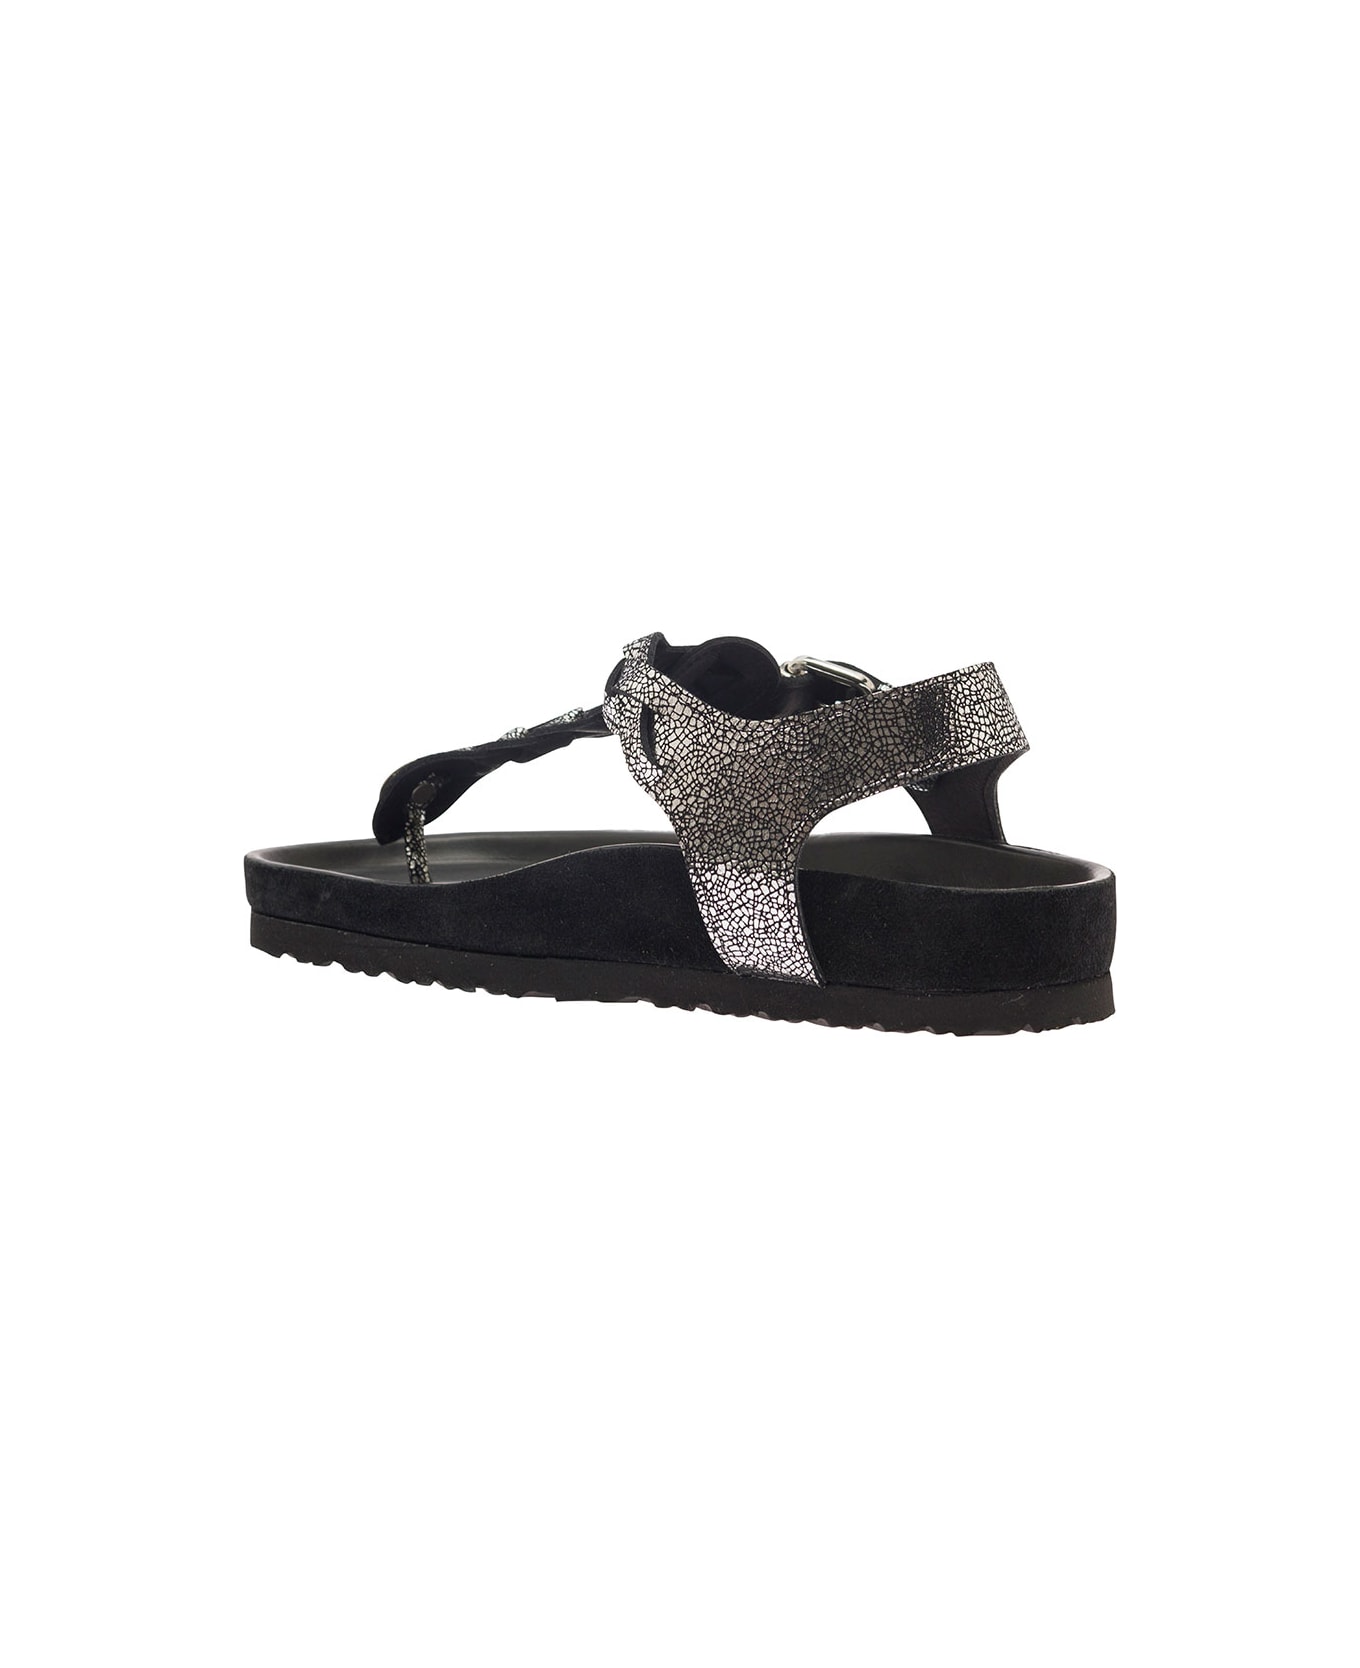 Isabel Marant 'brook' Silver Sandals With Braided Design In Metallic Leather Woman - Metallic サンダル